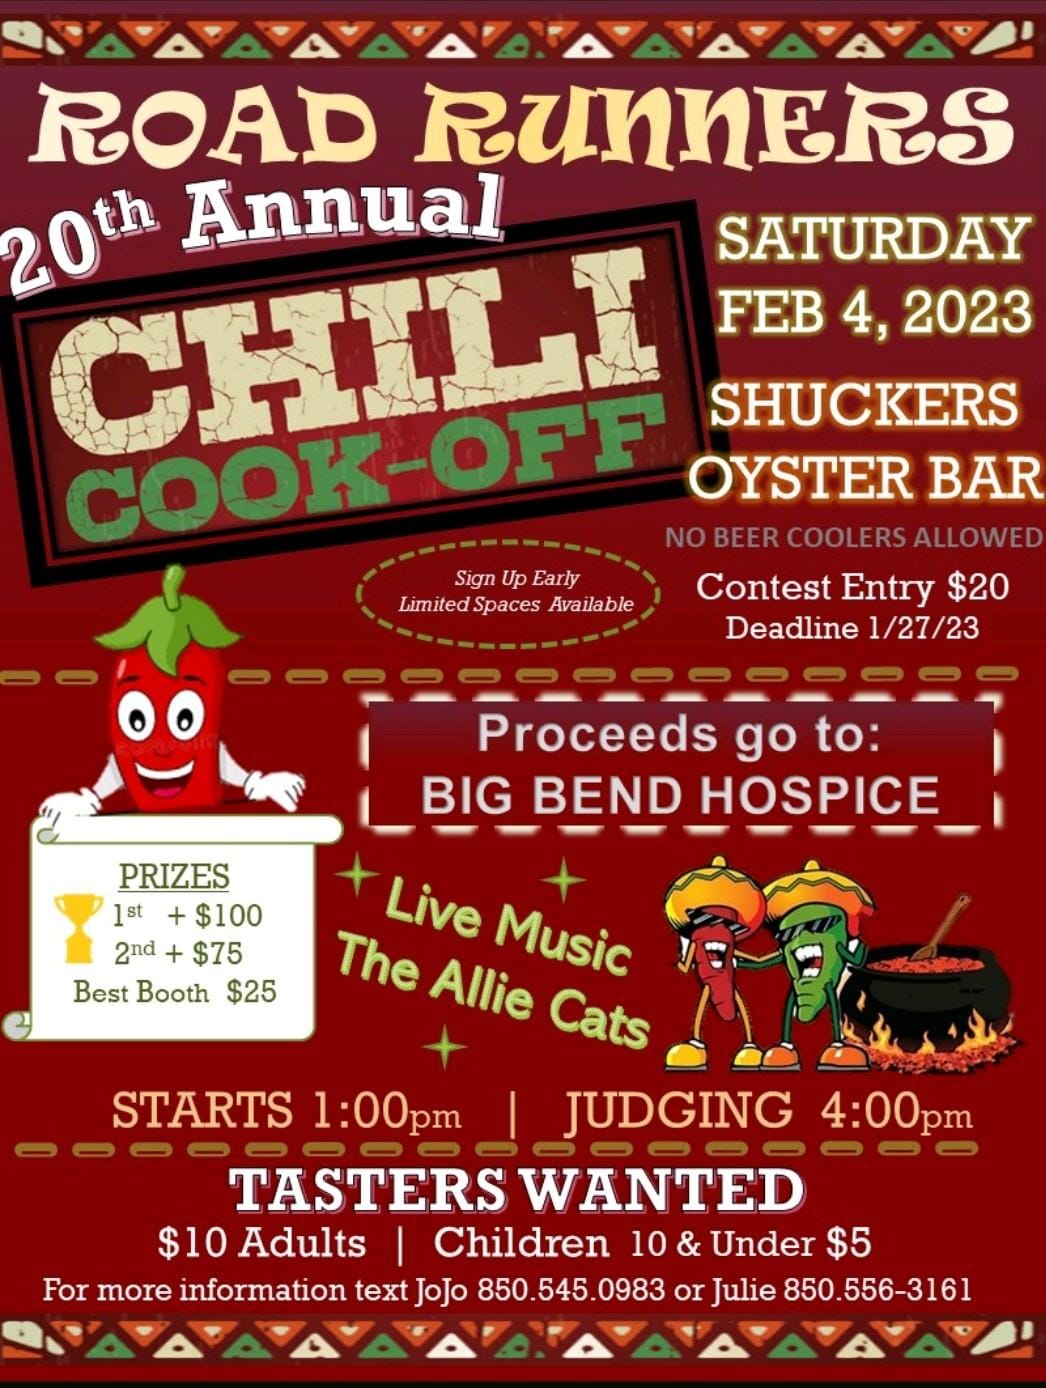 2023 Chili cookoff flyer for Saturday, February 4, 2023 event at Shuckers oyster bar. Proceeds benefit Big Bend Hospice. Live Music by the Allie Cats. $10 for adults, Children 10 & uner $5.